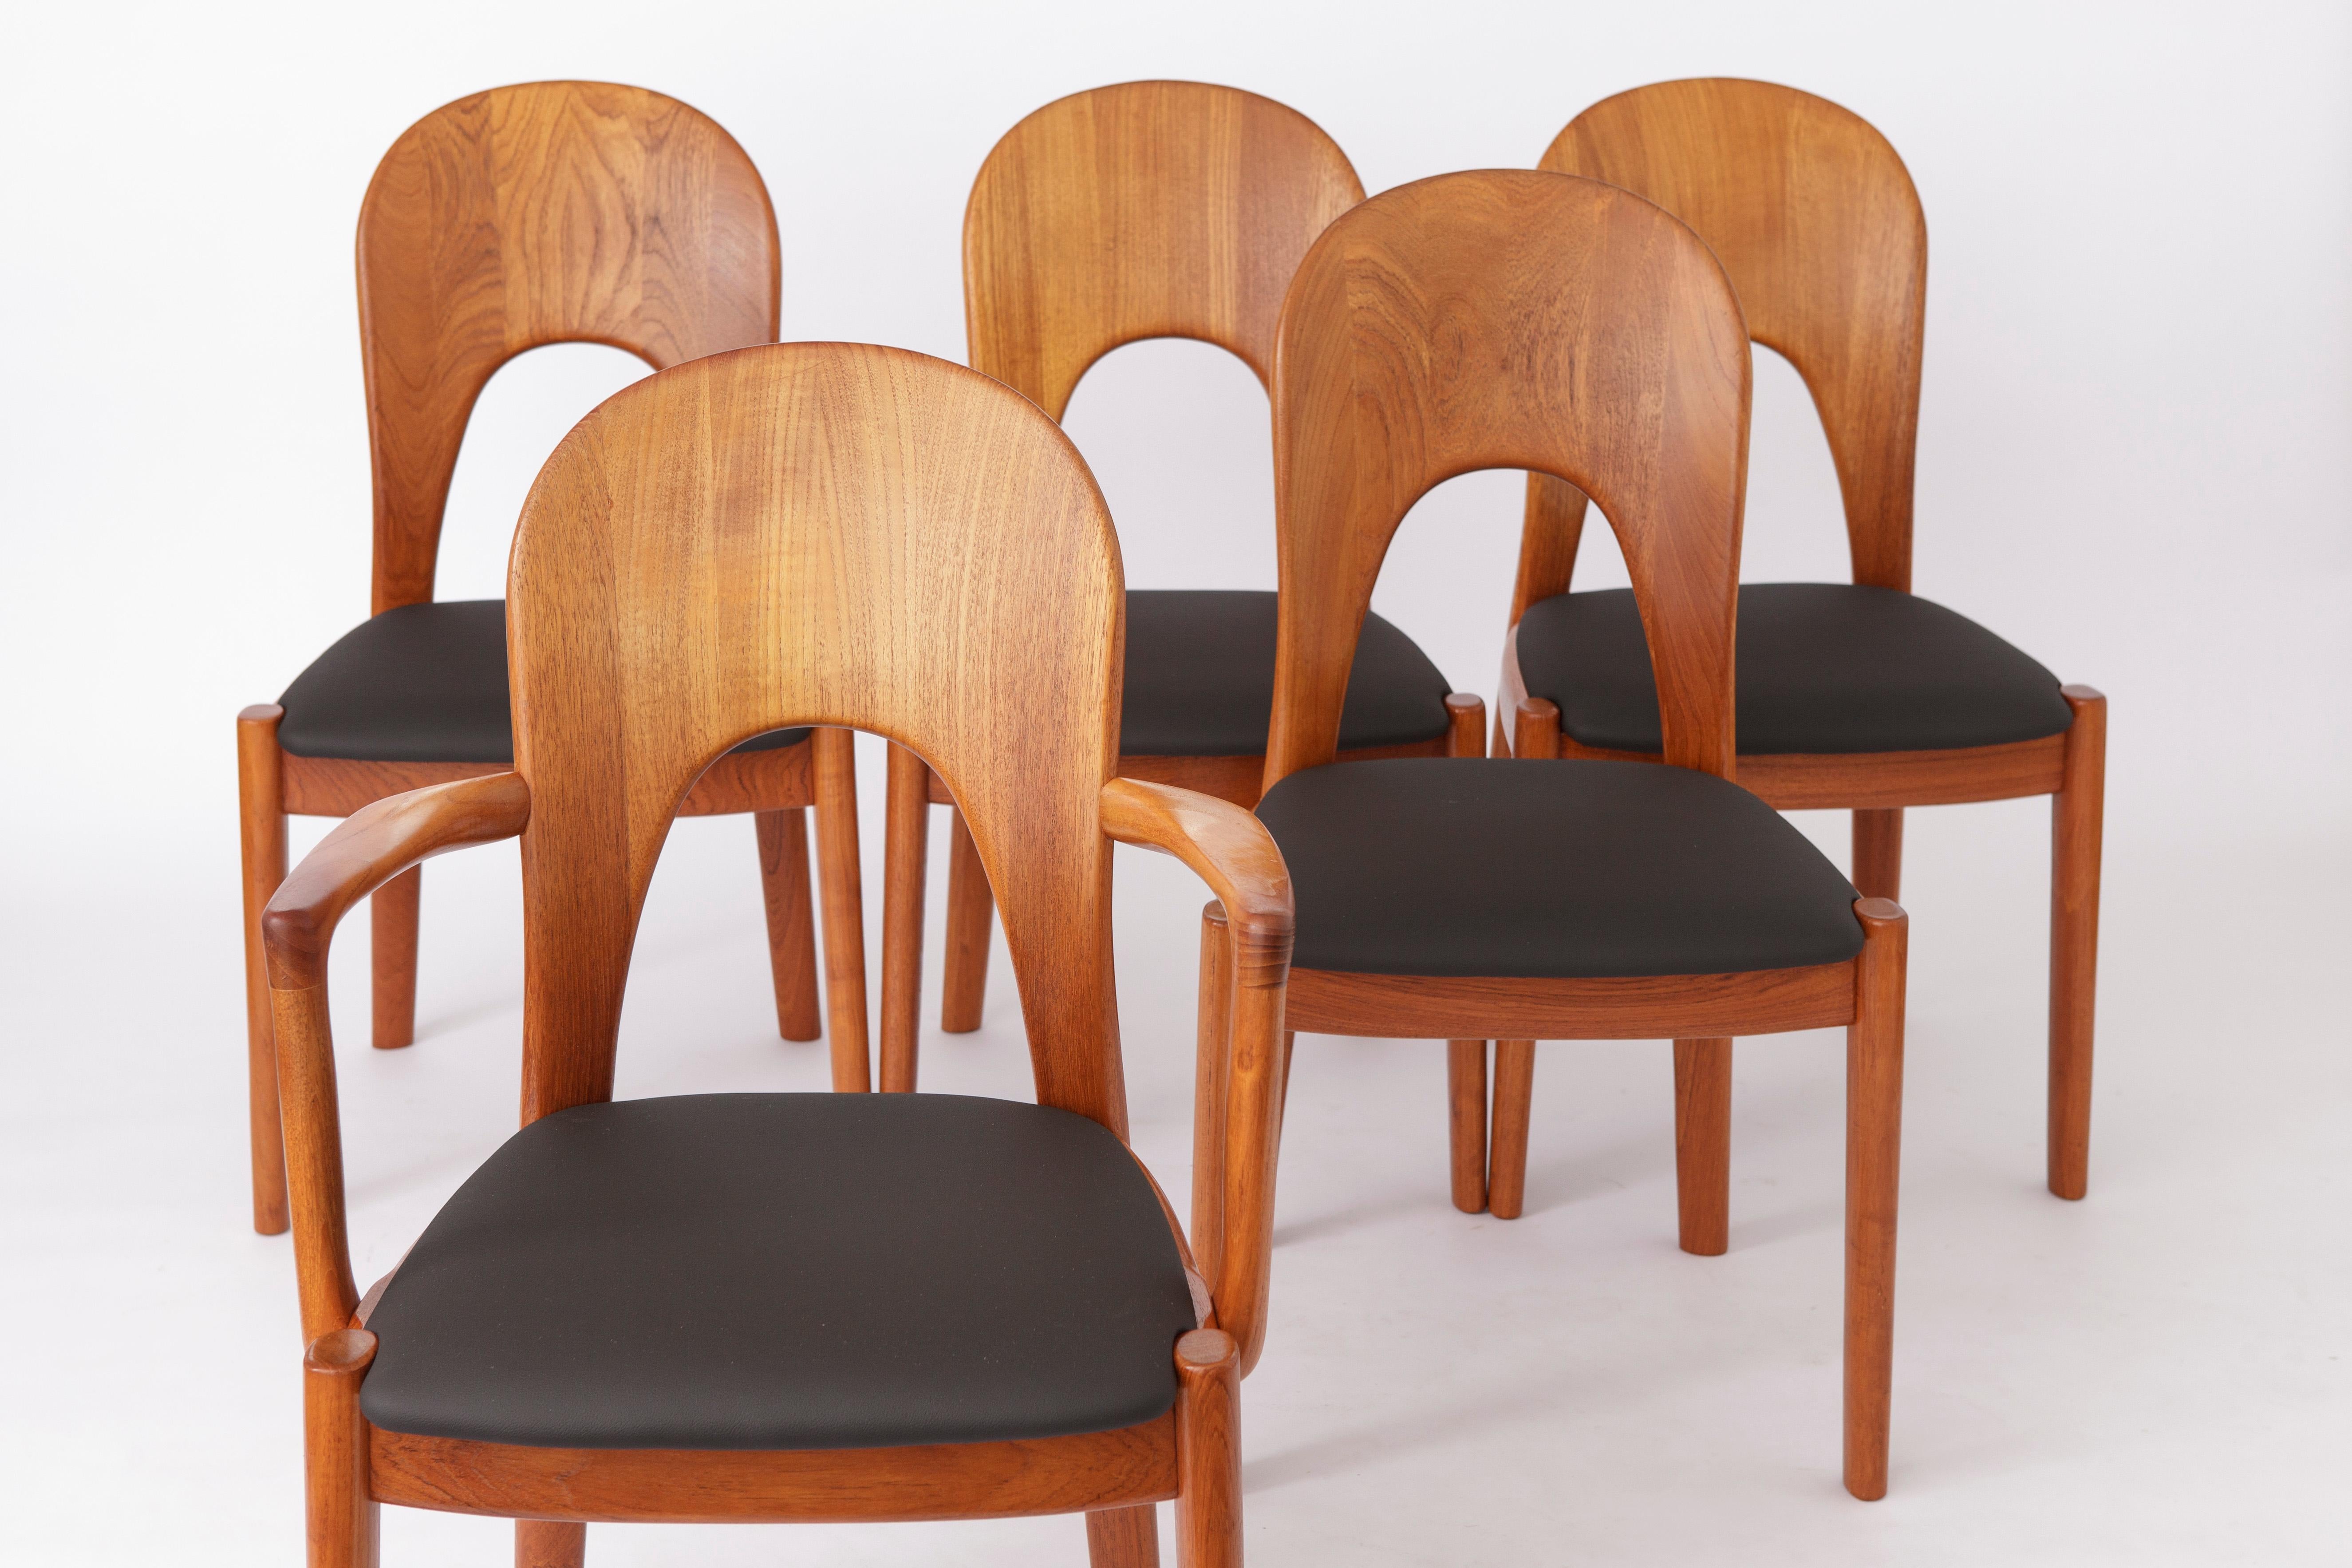 Vintage chairs from Danish designer Niels Koefoed. 
Displayed price is for a set of 5. 

Good vintage condition. 
Sturdy teak wood frame, refurbished and oiled. 
Seats reupholstered with black artificial leather. 
Can be also redone in black textile